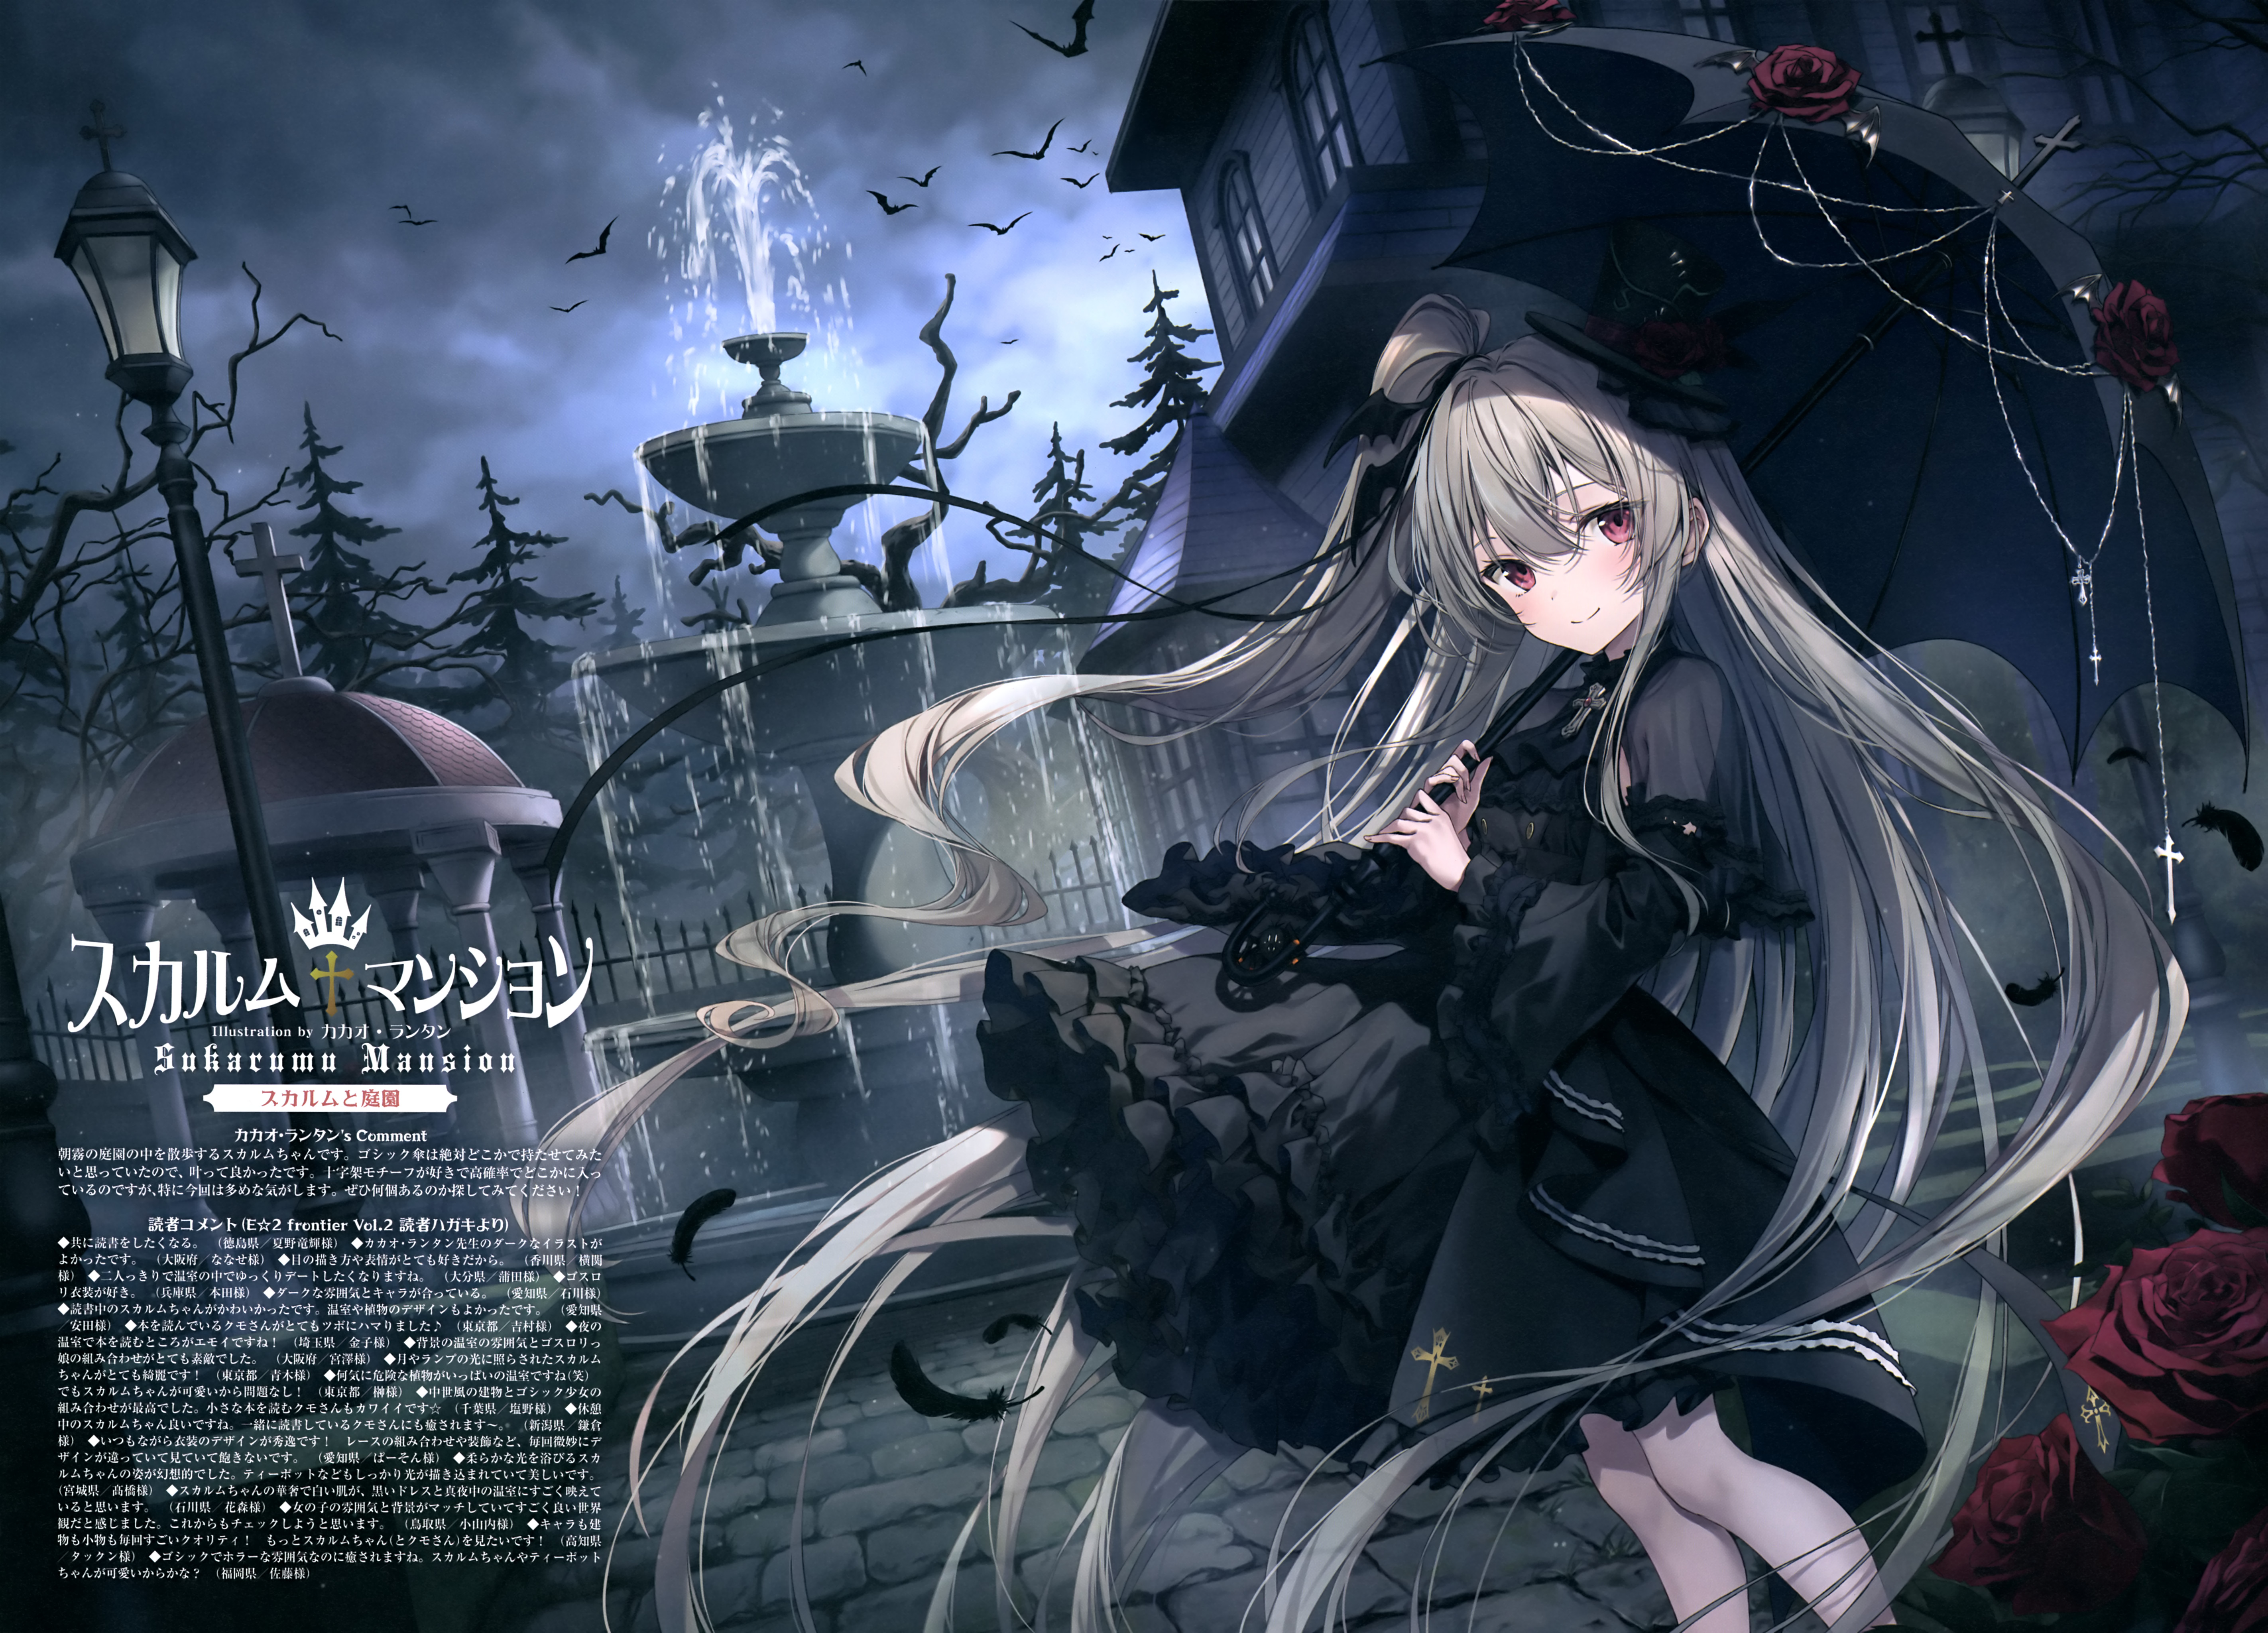 Anime Anime Girls Long Hair Umbrella Fountain Bats Sky Clouds Japanese Text Trees Building Smiling L 5689x4096